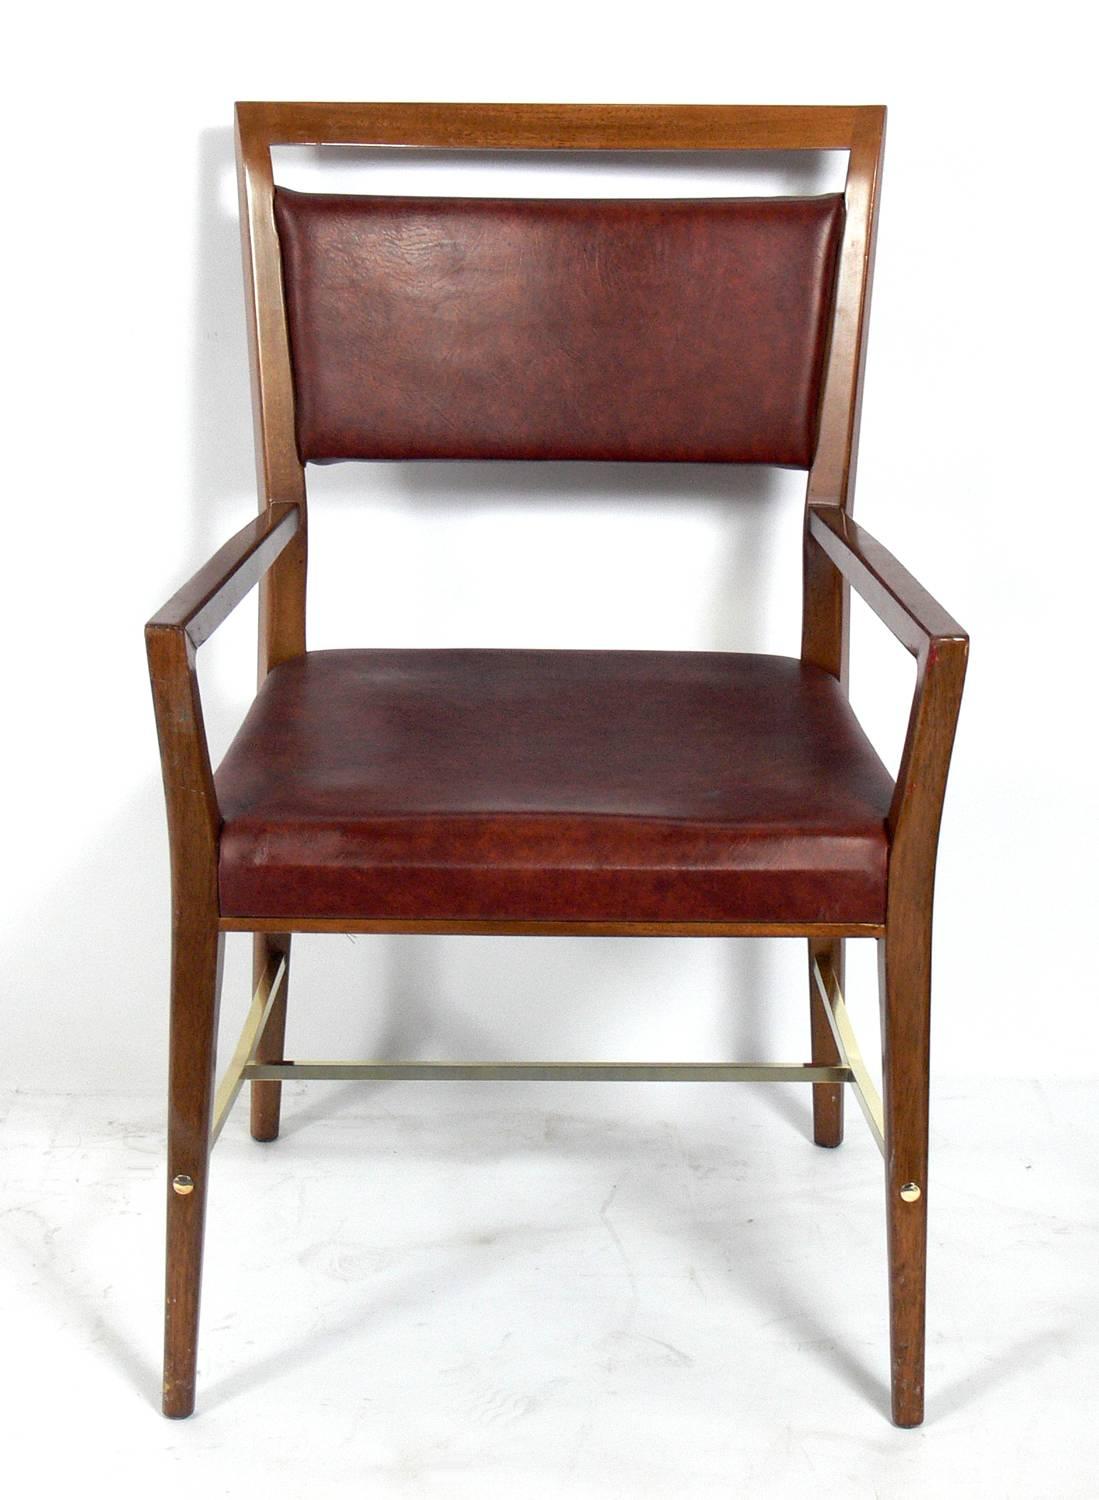 Set of 12 dining chairs, designed by Paul McCobb, American, circa 1950s. These chairs are currently being refinished and reupholstered and can be completed in your choice of finish color and reupholstered in your fabric. The price noted below